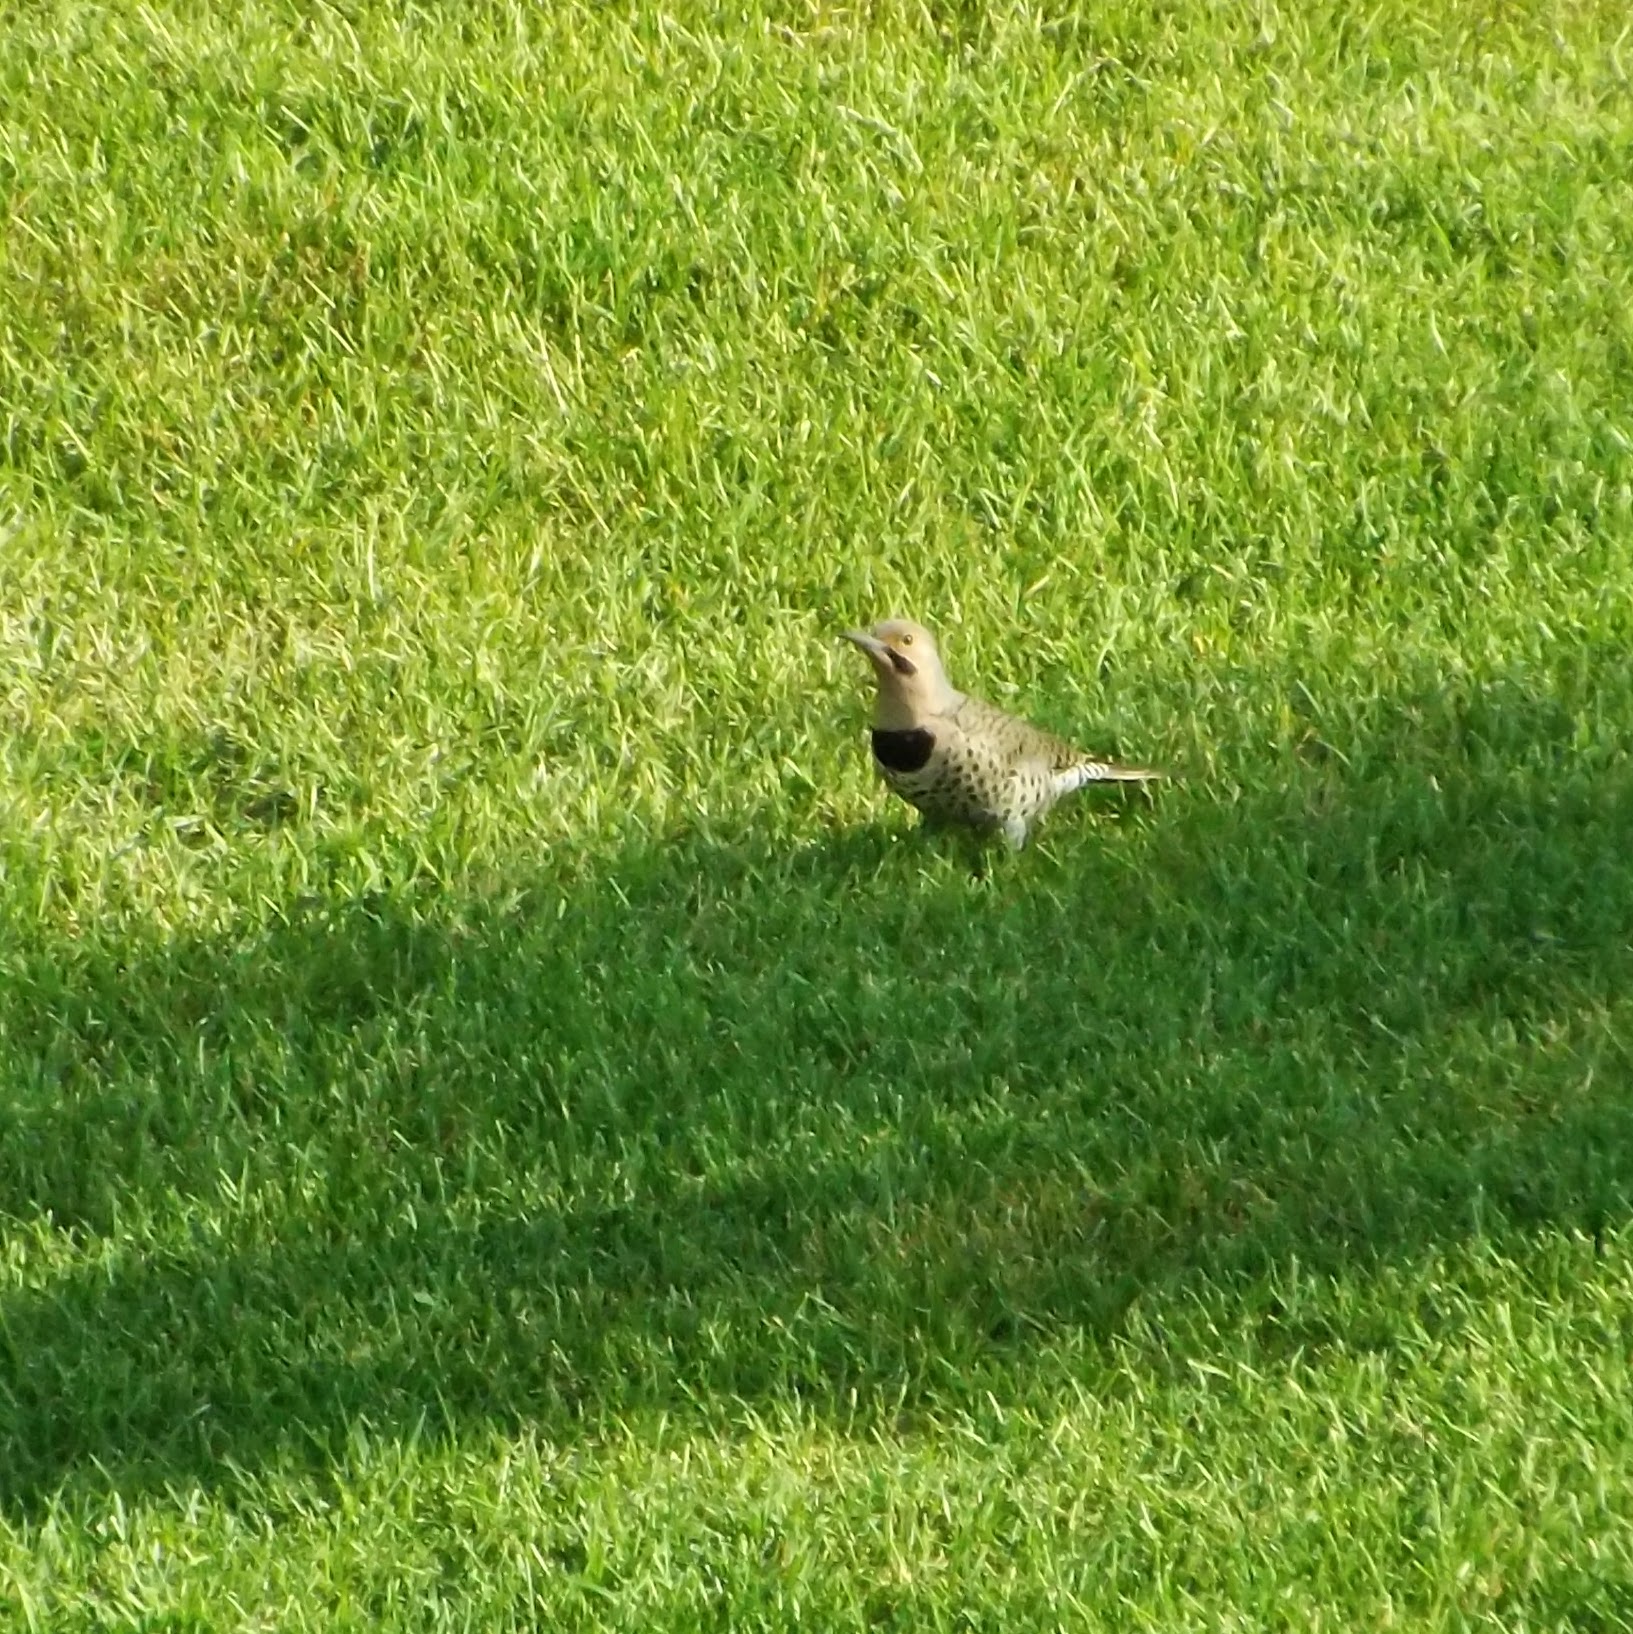 A northern flicker, hanging out on the grass